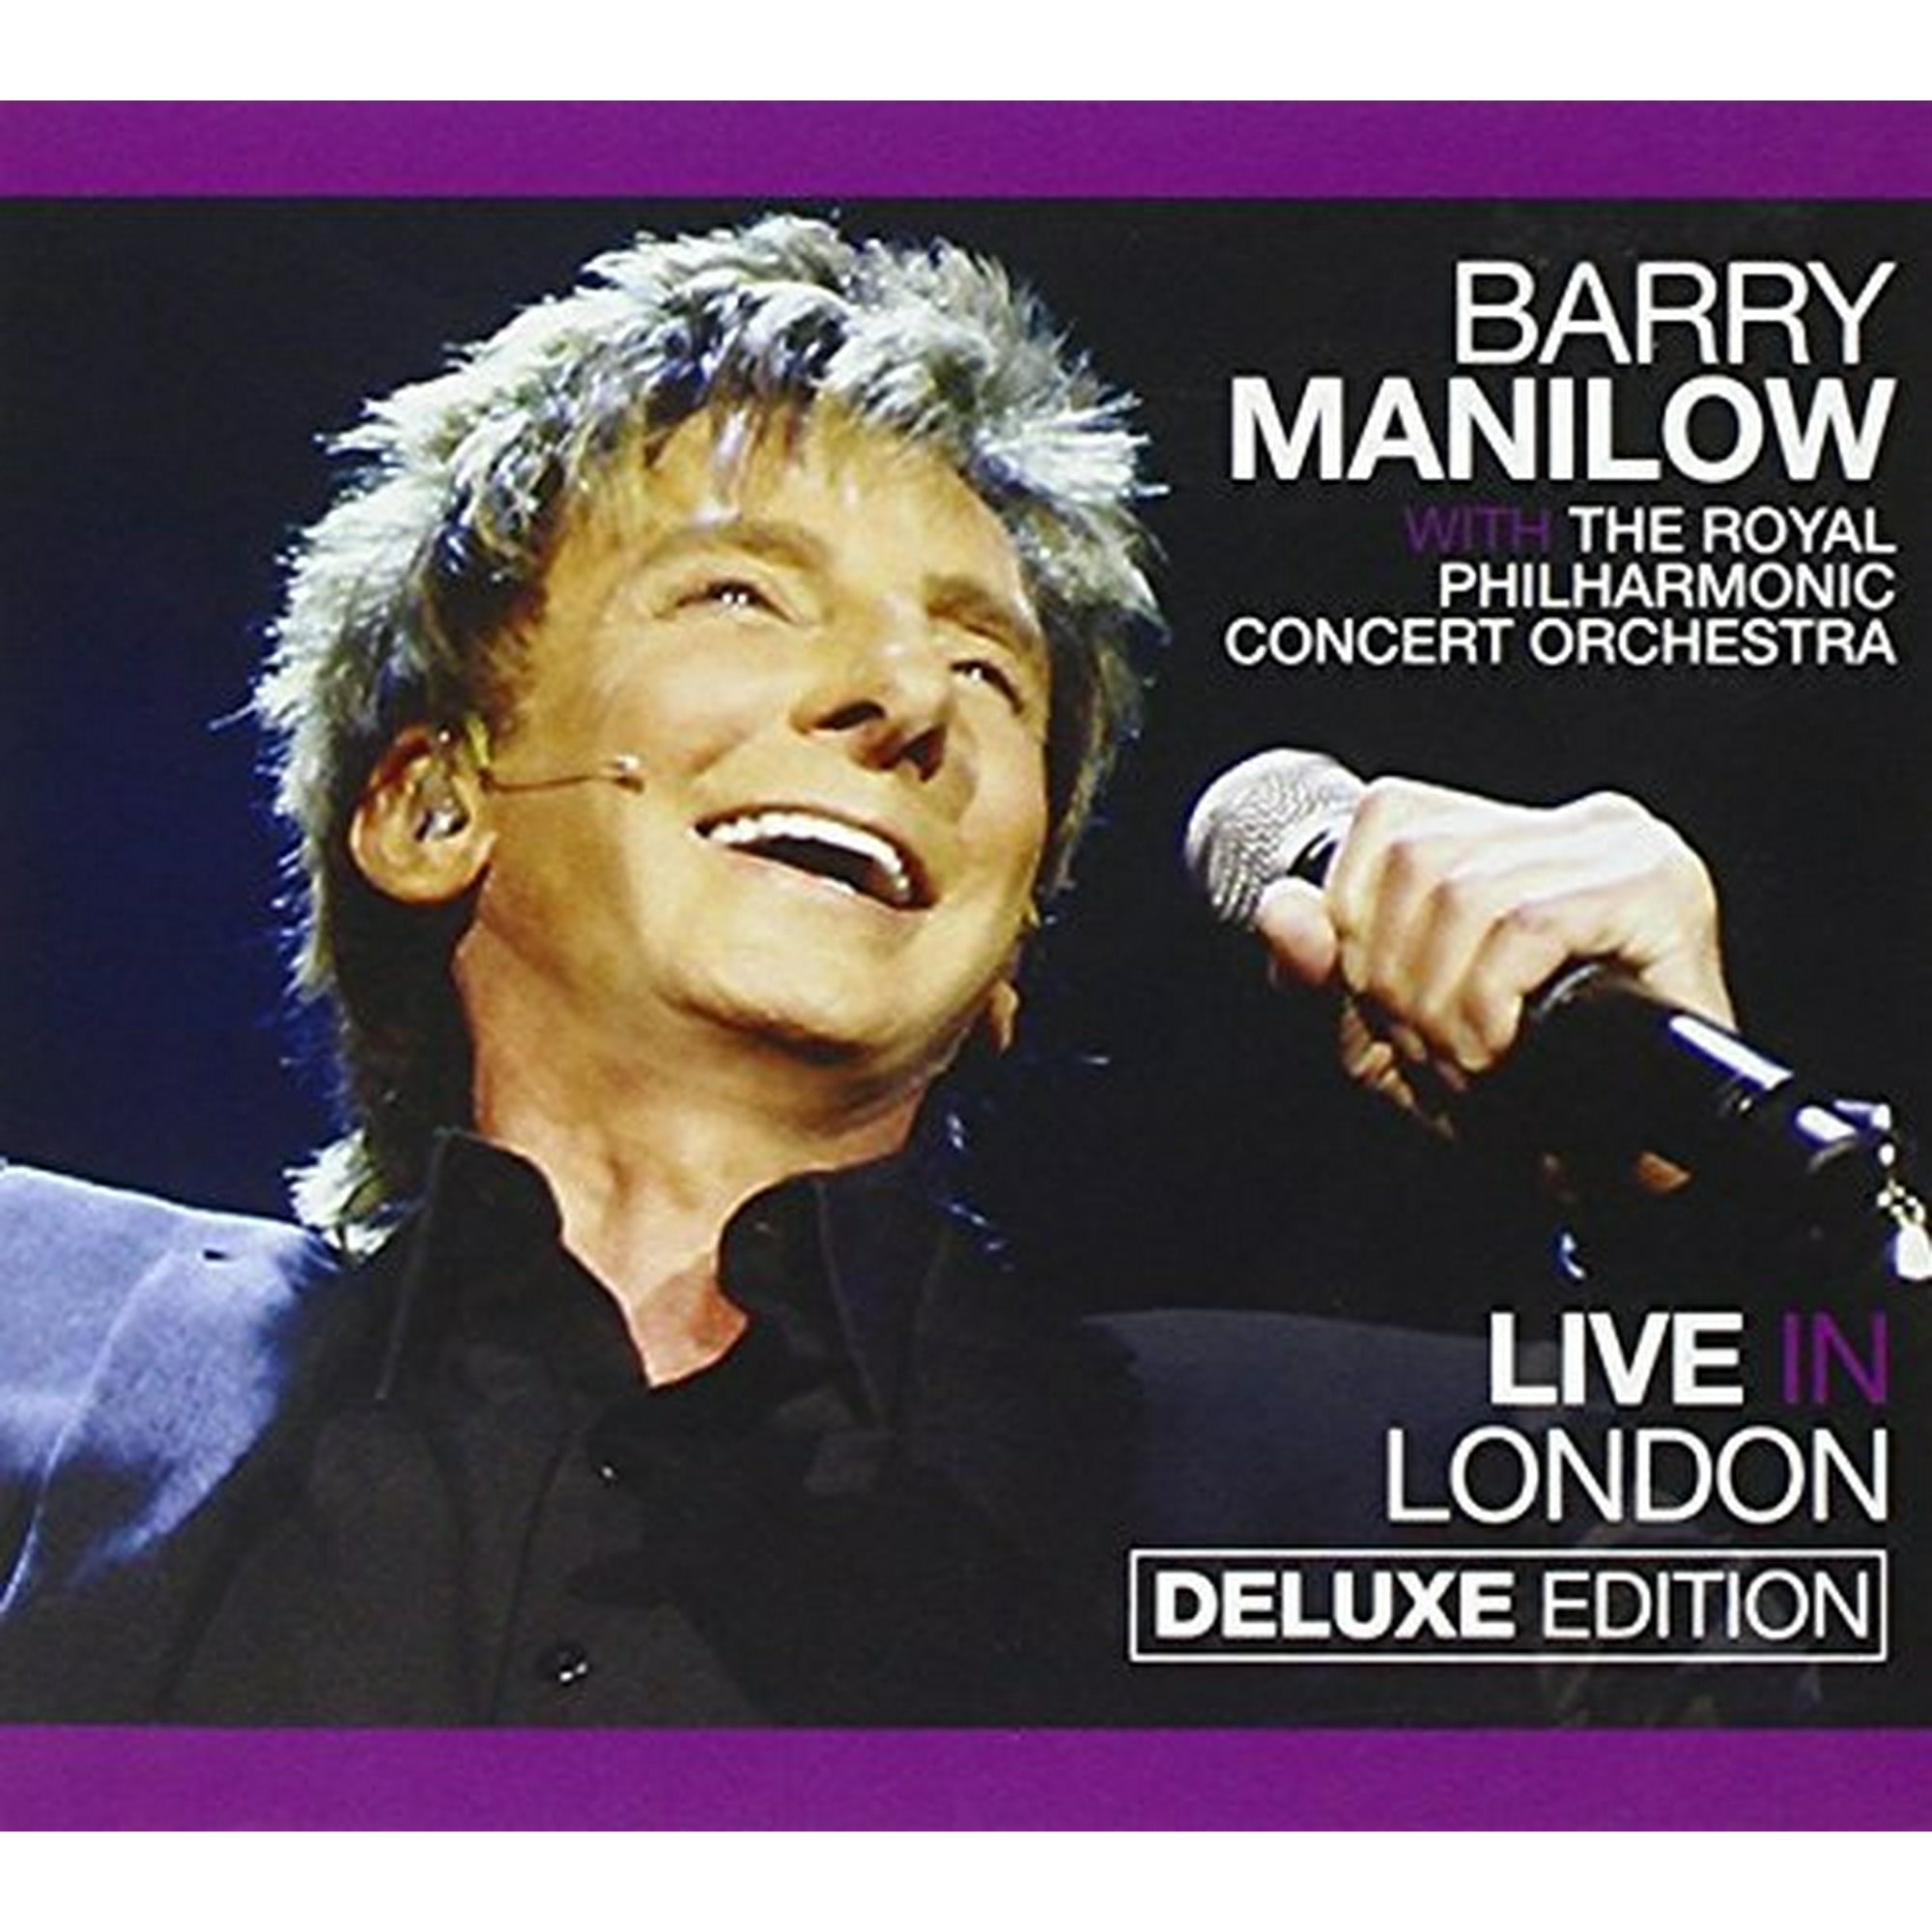 Barry Manilow Live in London [CD/DVD] [Deluxe Edition] [Digipak] CD |  Walmart Canada